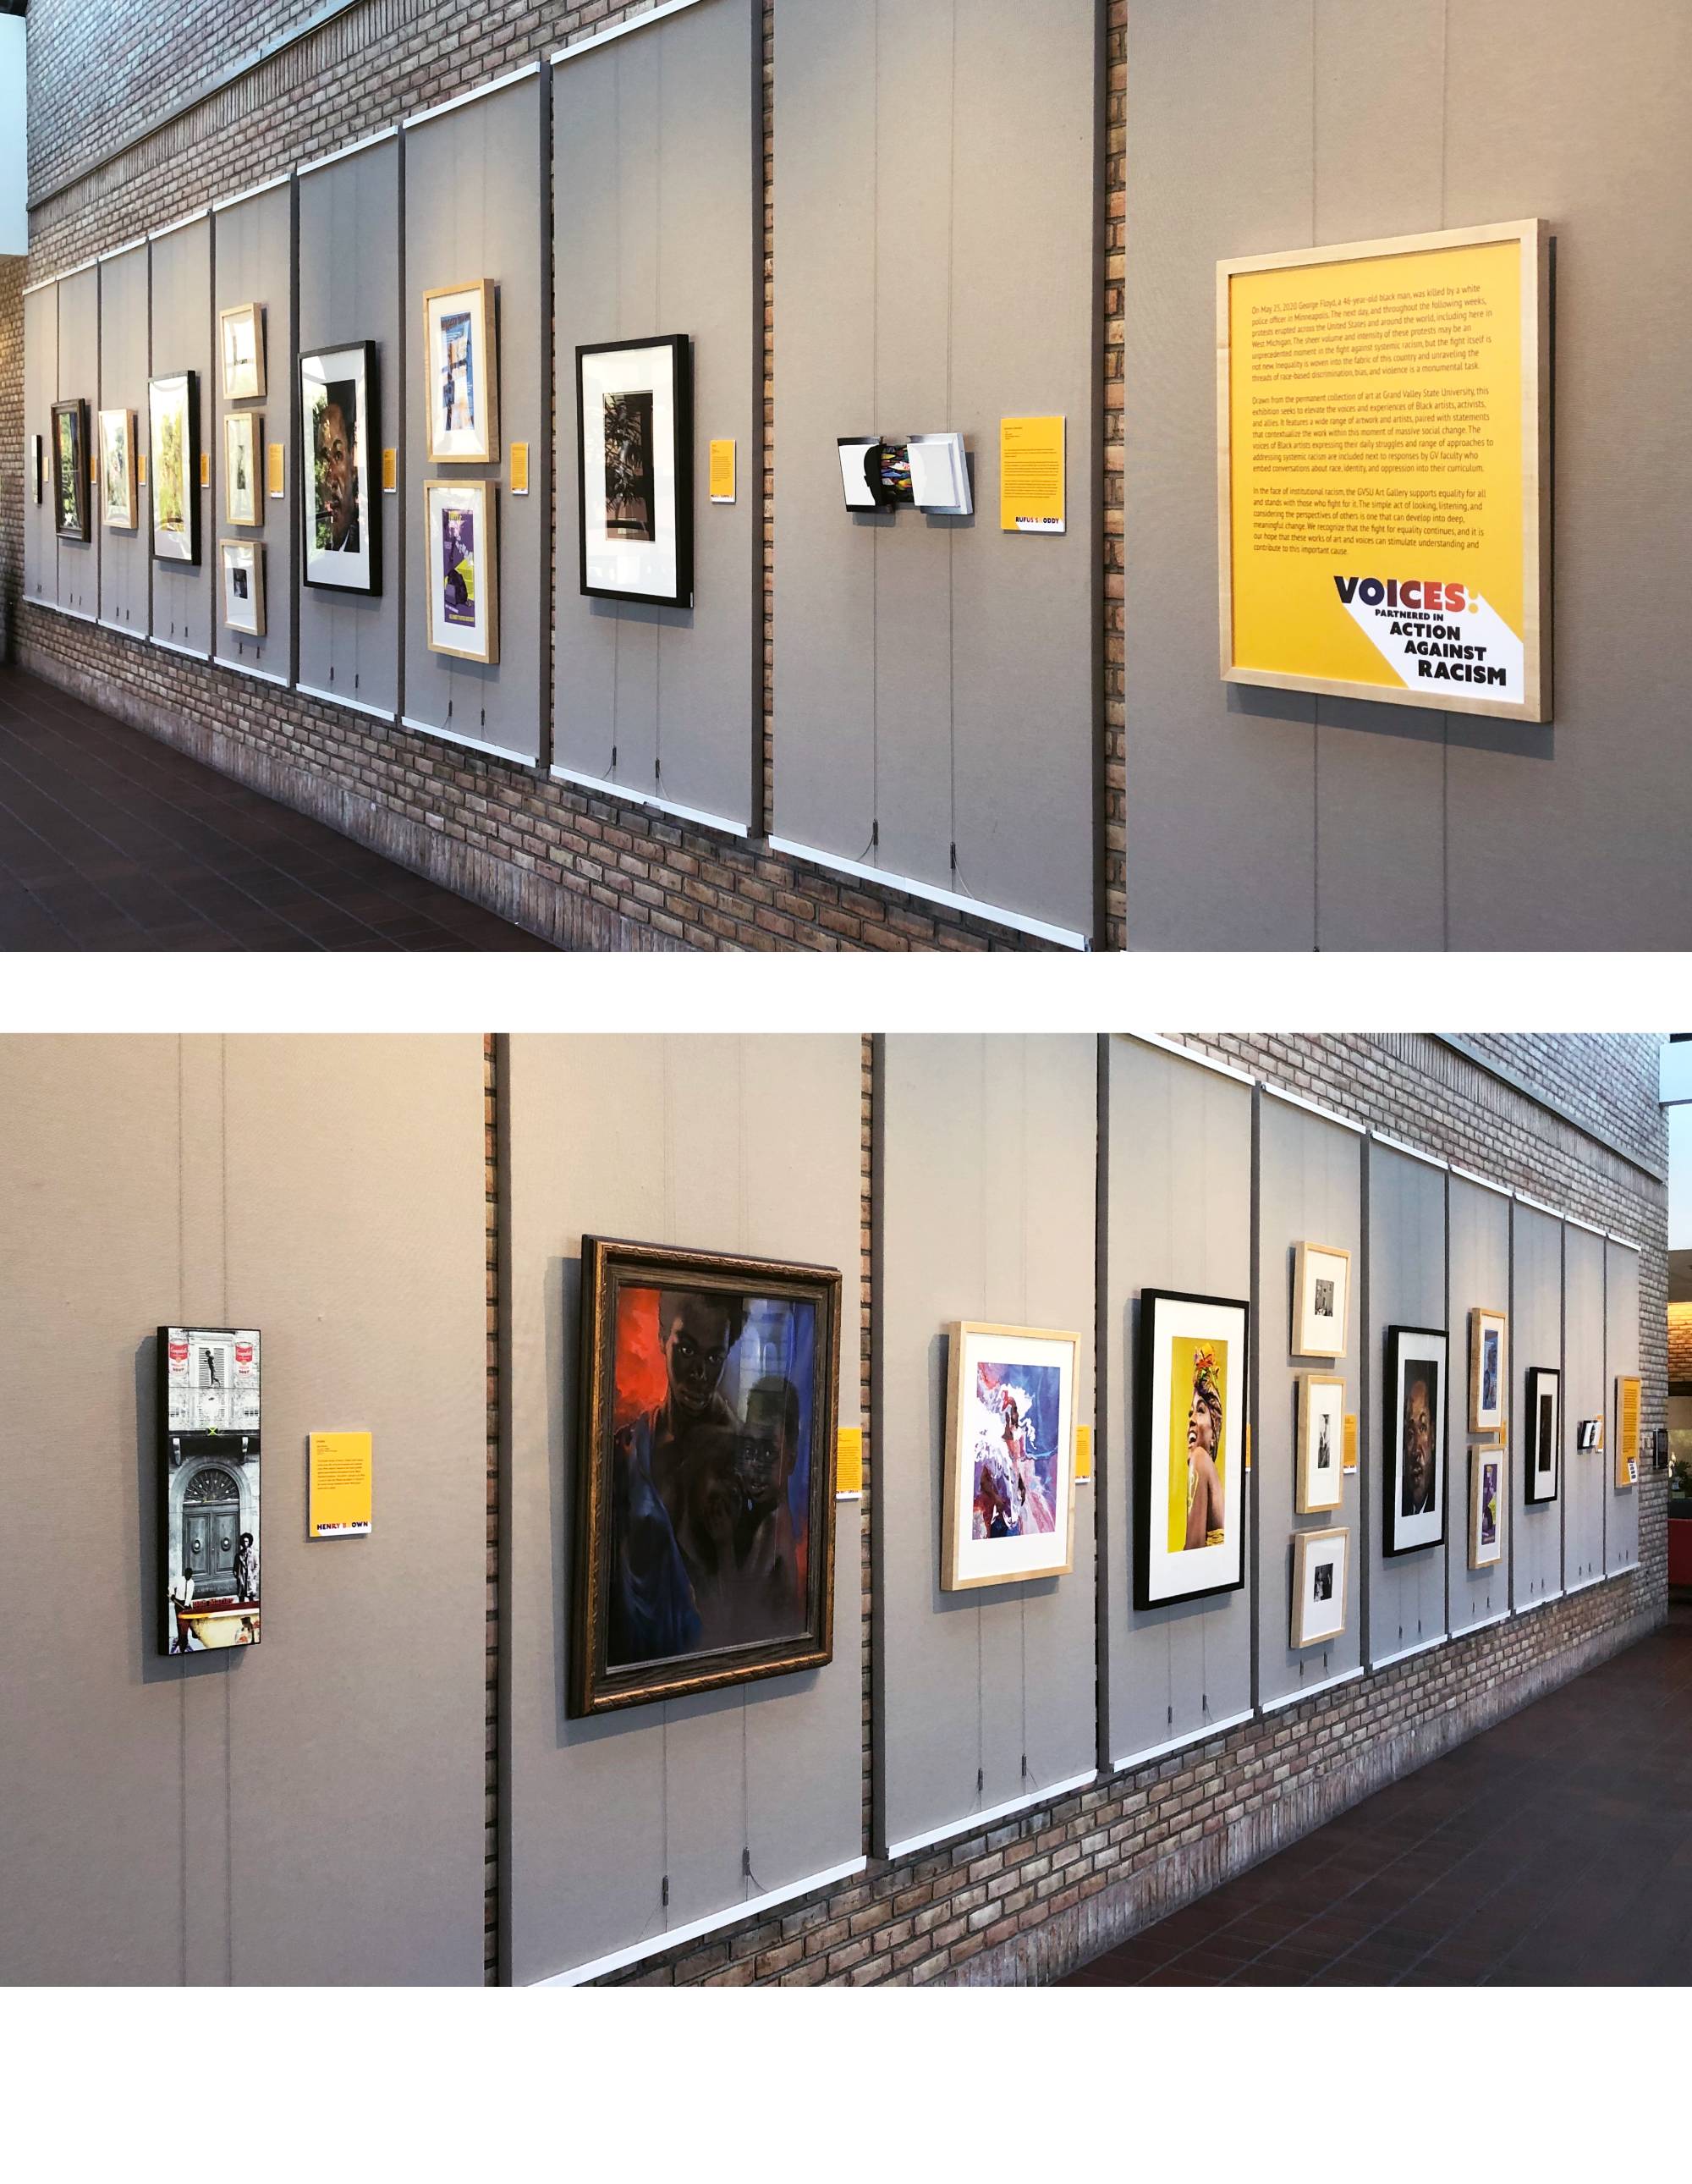 Two photographs of a wall with artworks hanging in a line